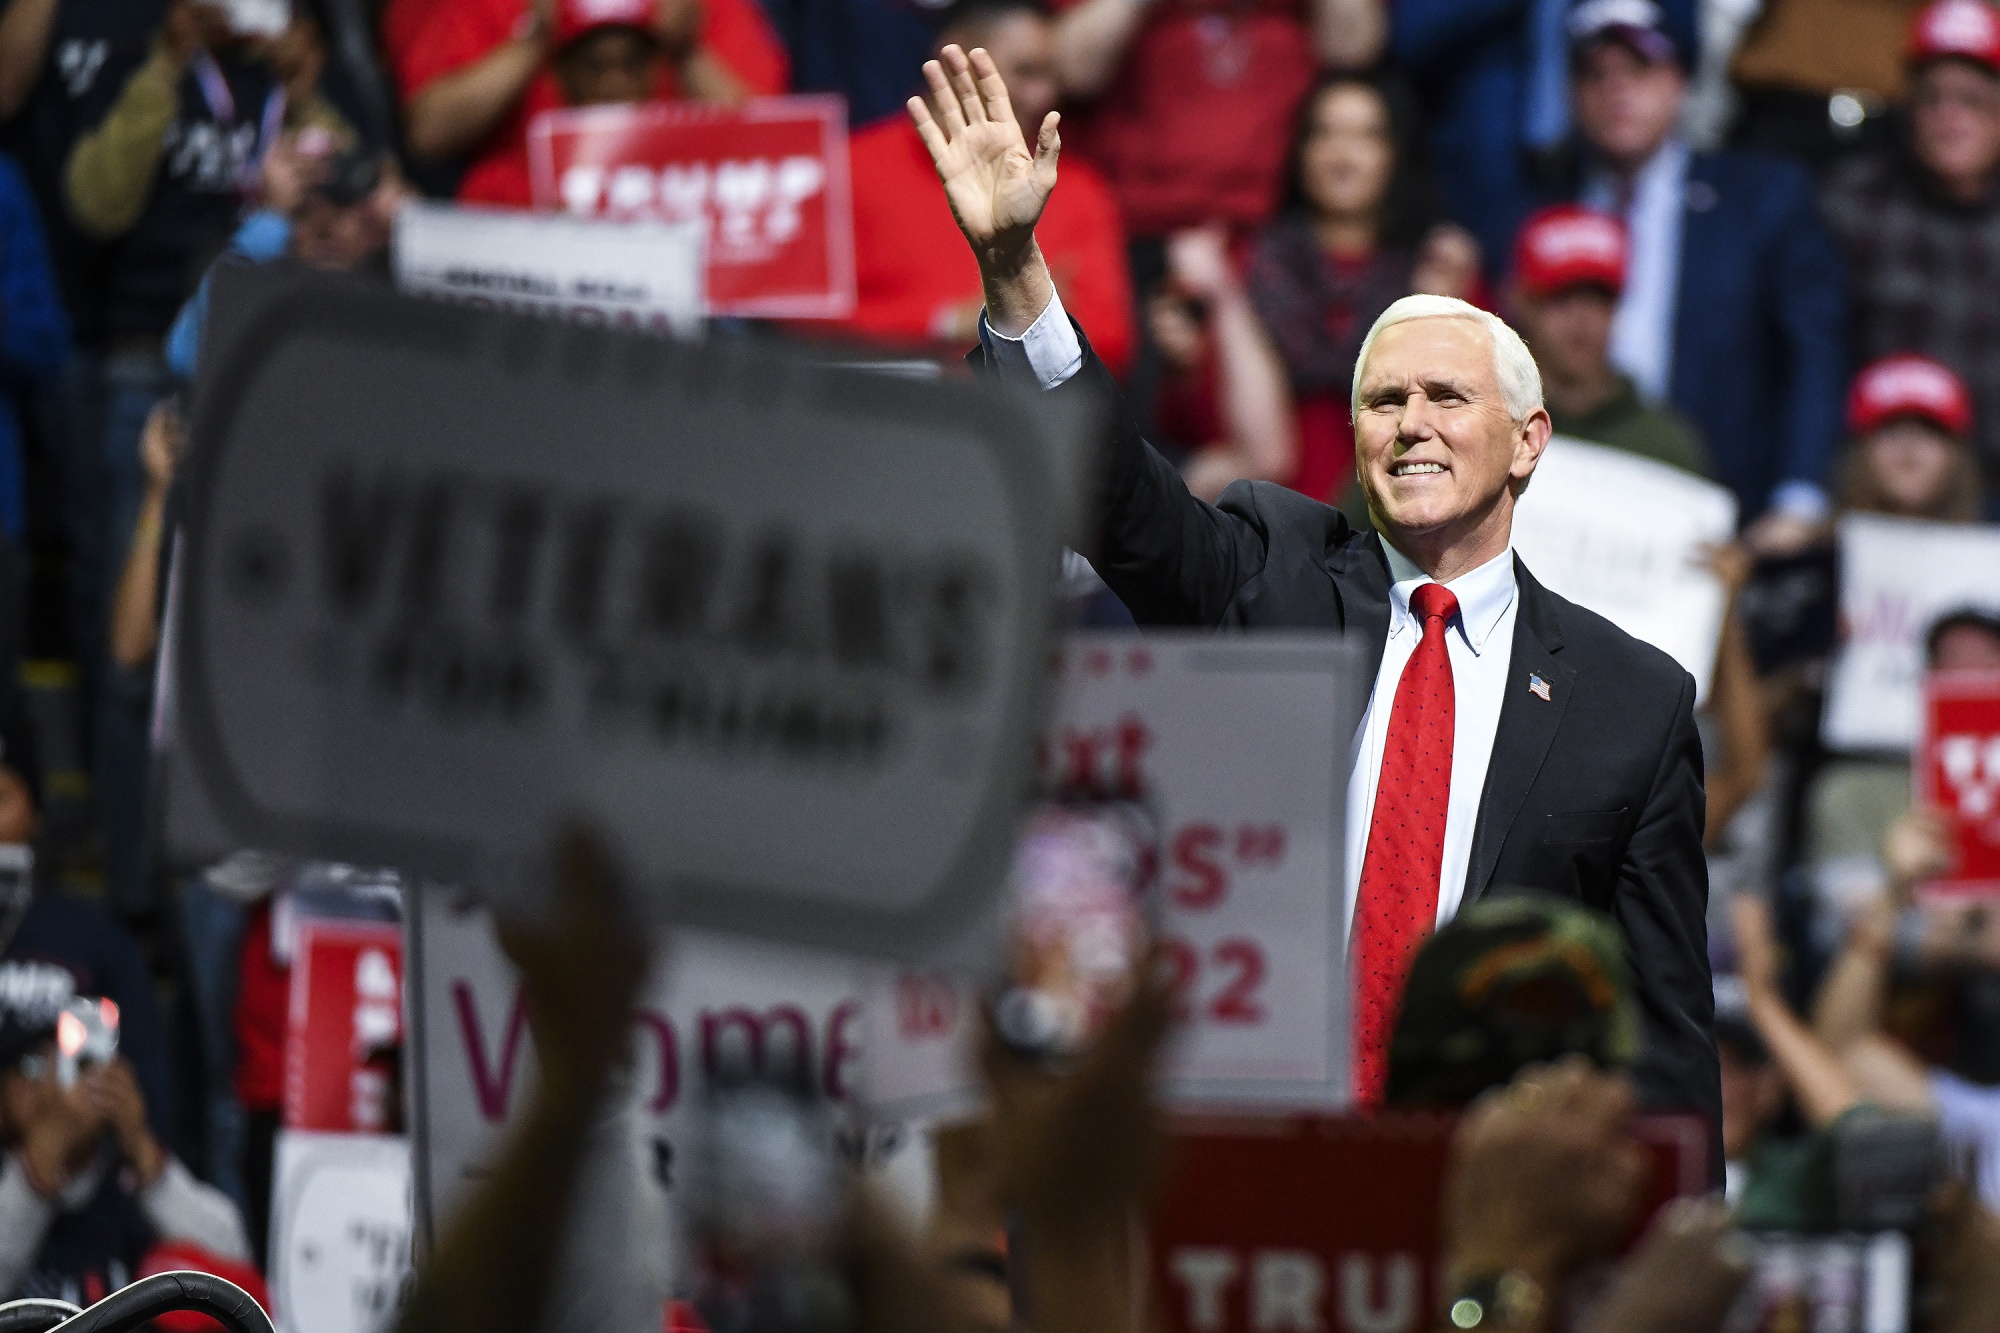 Mike Pence's 2024 Presidential Campaign Has Already Begun - Bloomberg